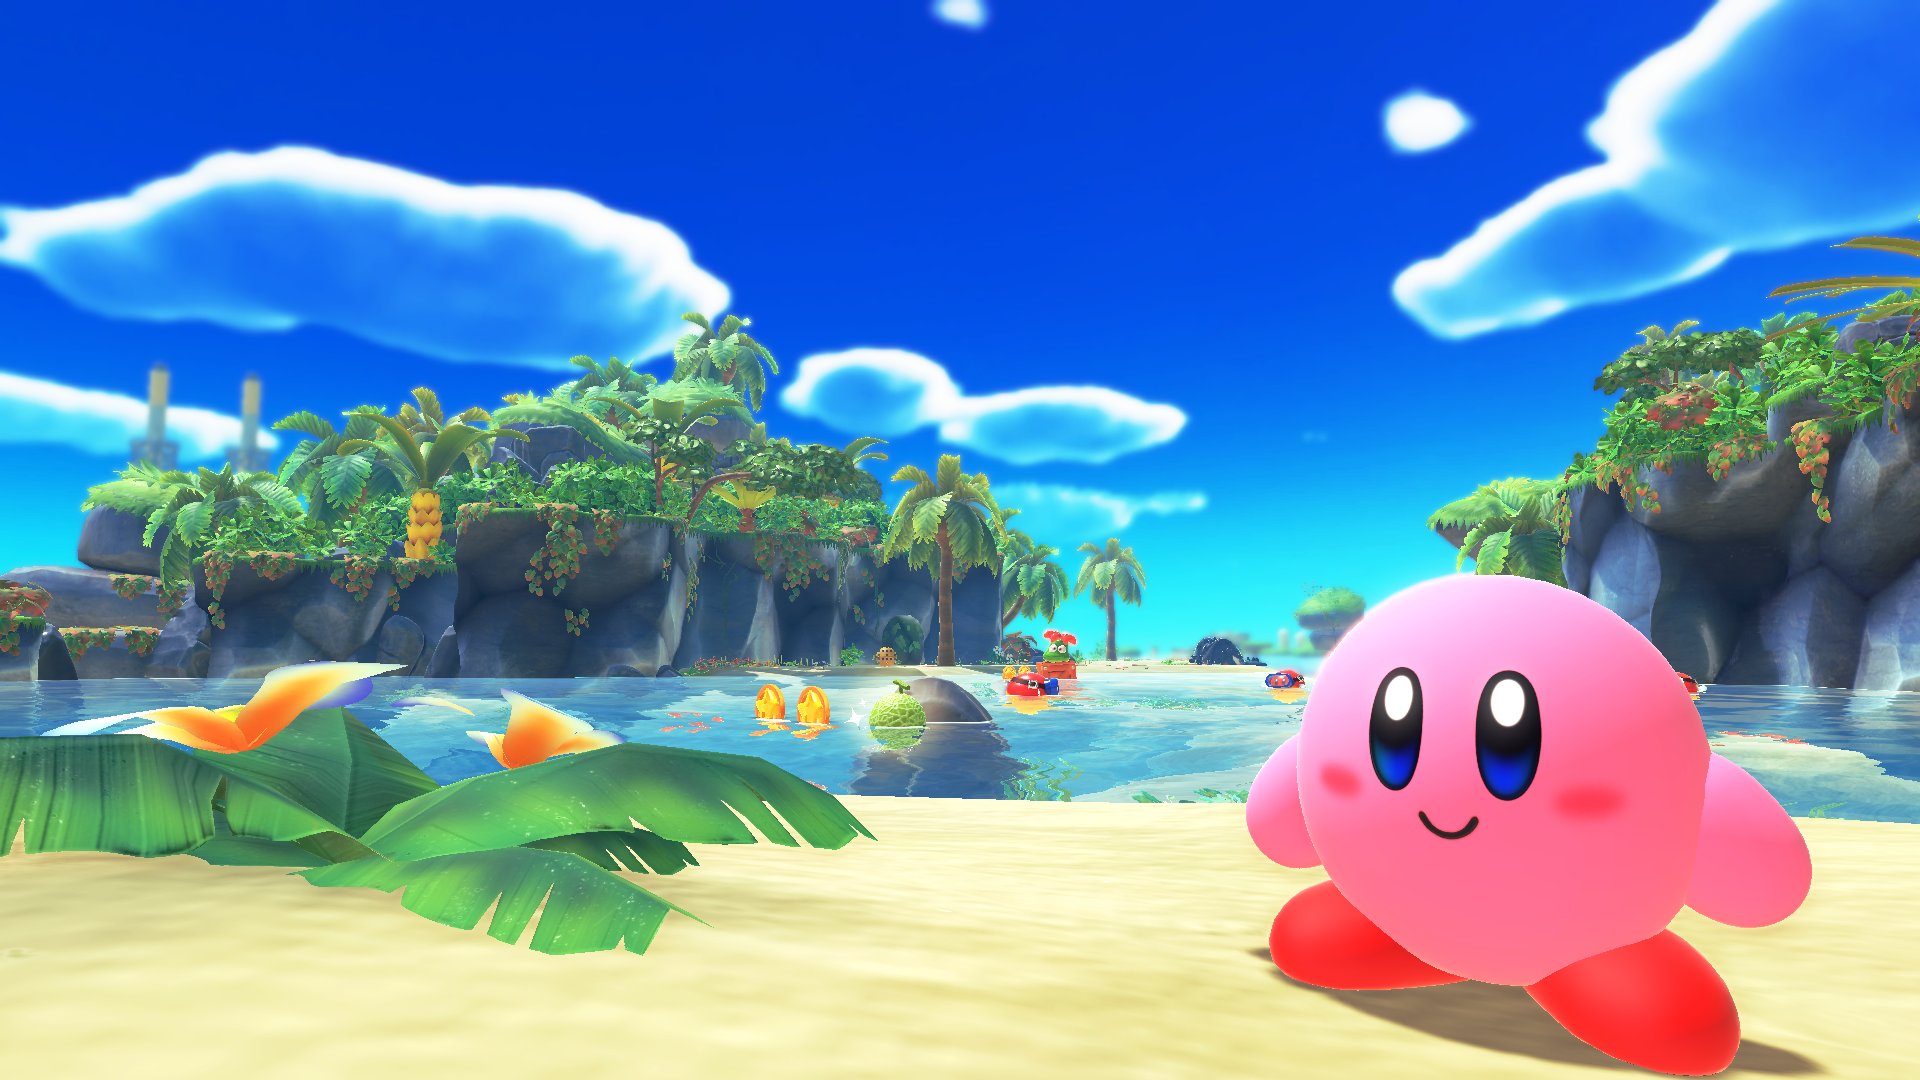 Kirby the Puffball day of summer